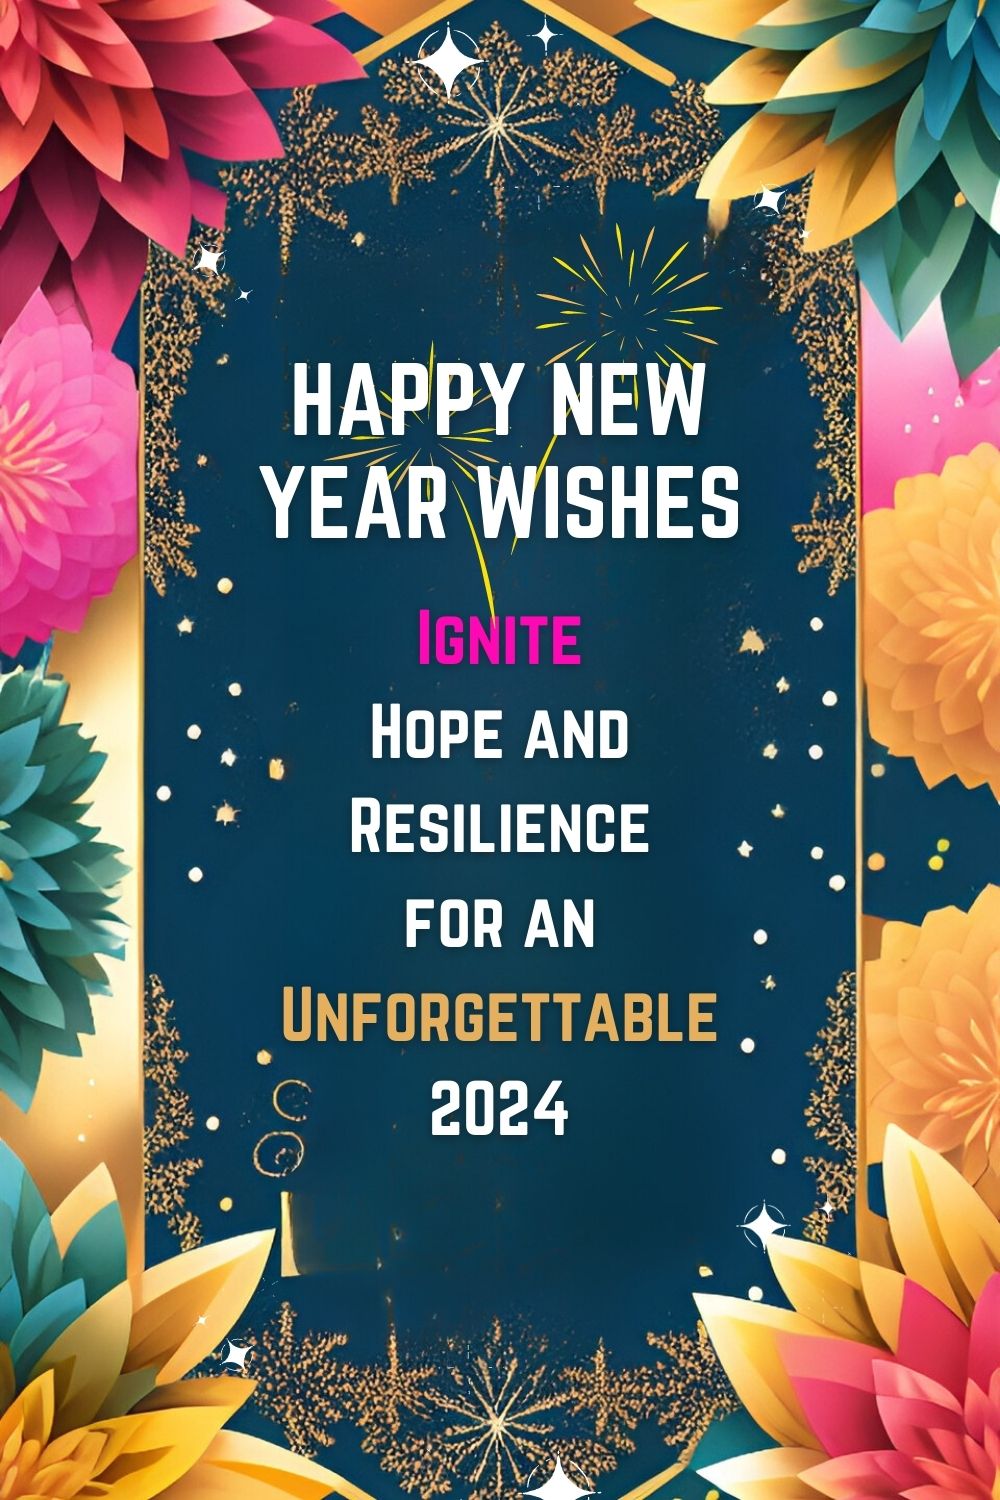 Happy New Year 2024: Wishes, quotes, messages, and images